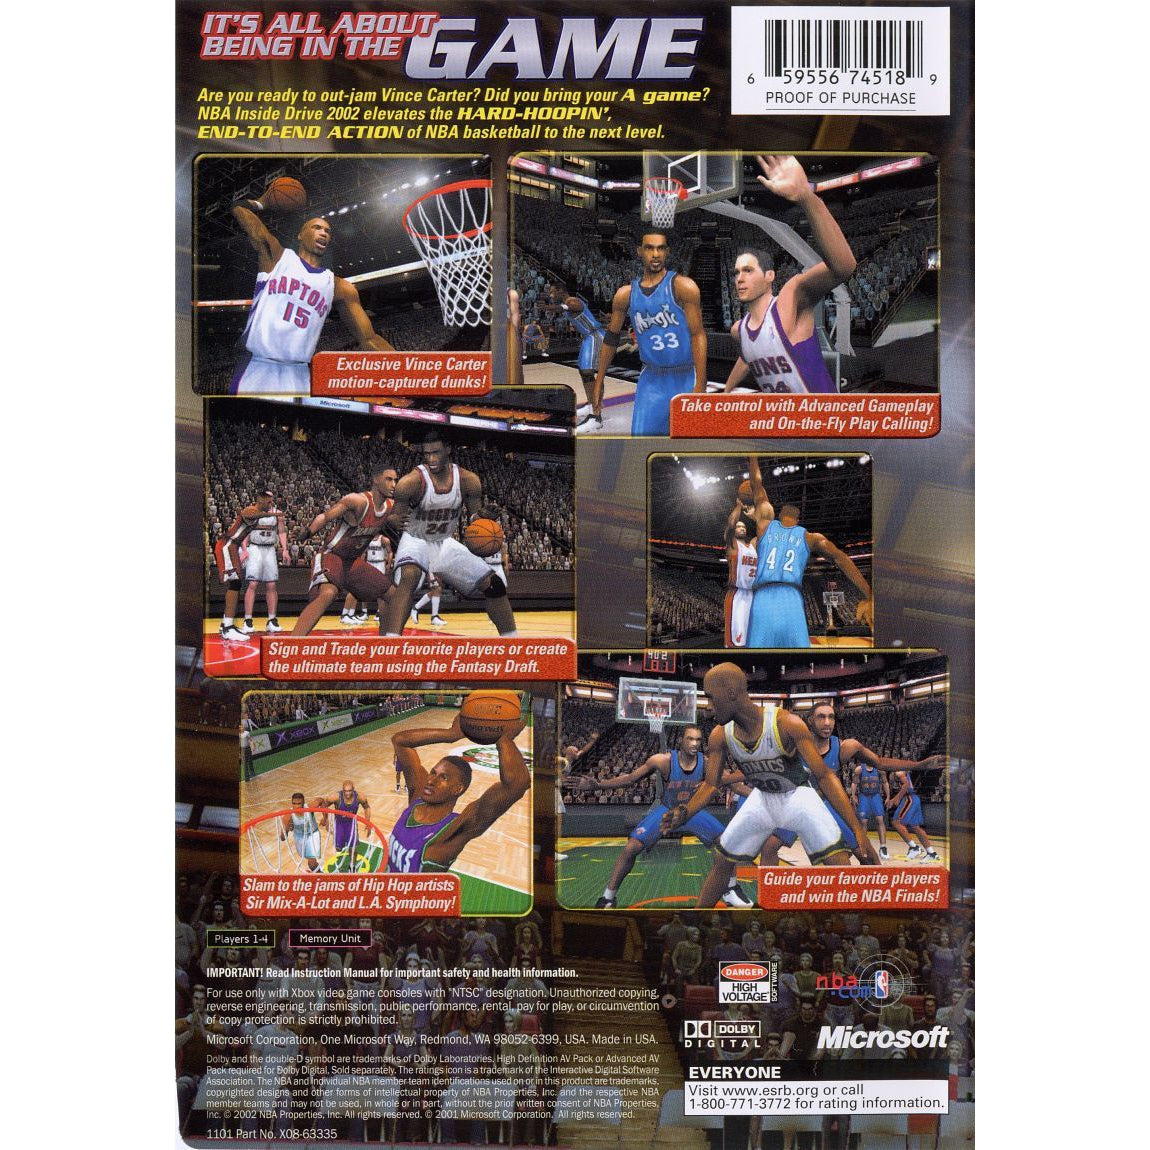 NBA Inside Drive 2002 - Microsoft Xbox Game Complete - YourGamingShop.com - Buy, Sell, Trade Video Games Online. 120 Day Warranty. Satisfaction Guaranteed.